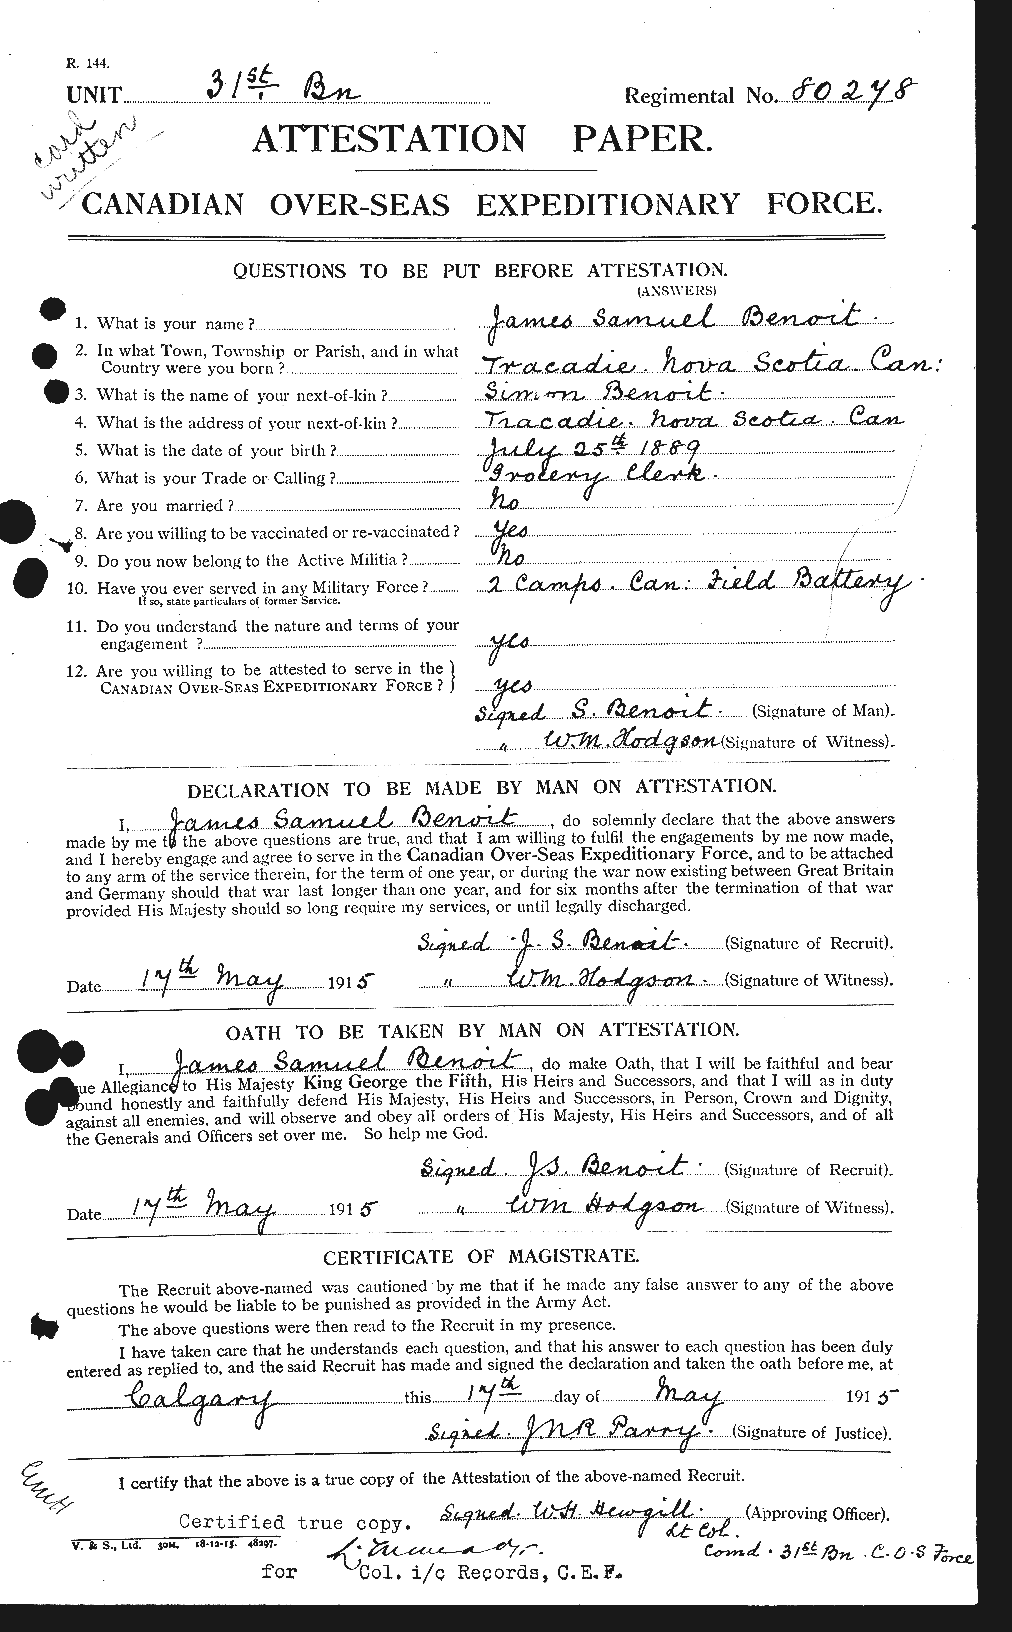 Personnel Records of the First World War - CEF 236707a